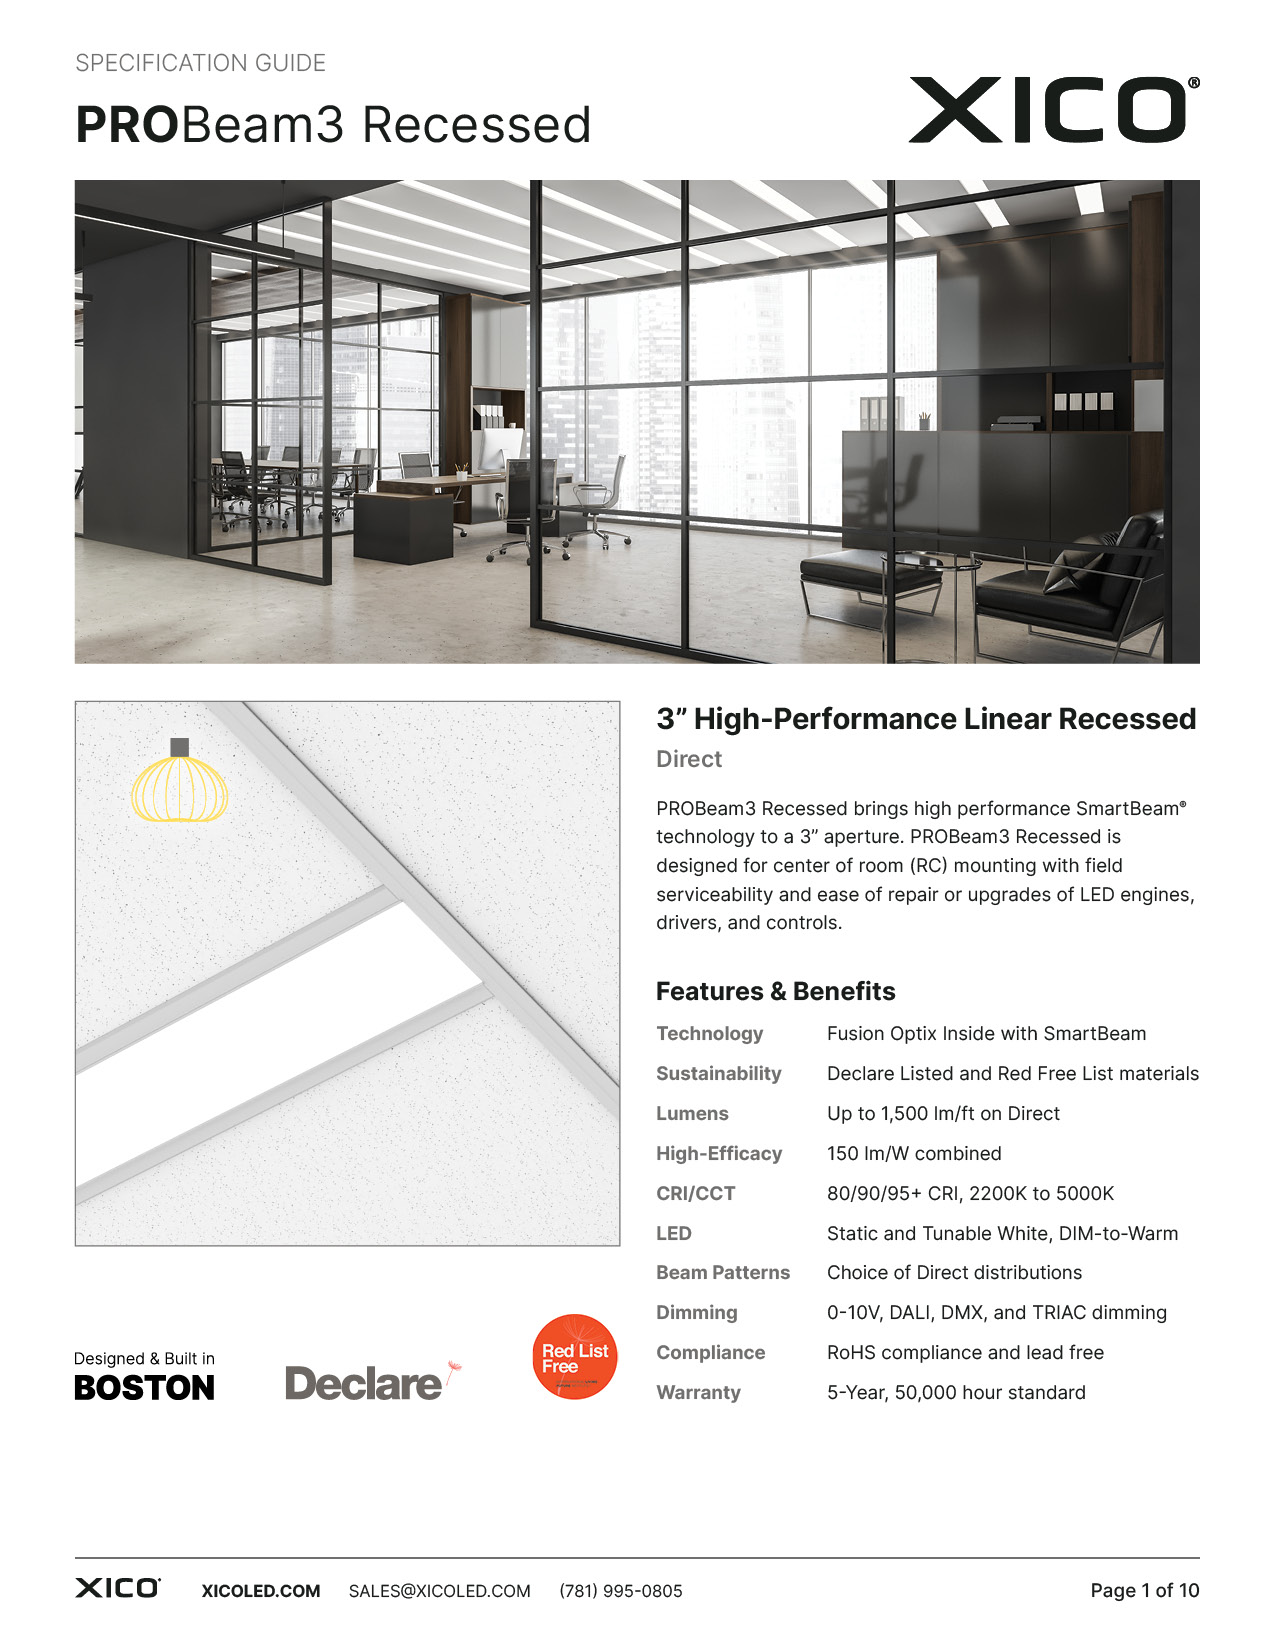 PROBeam3 Recessed Specification Guide